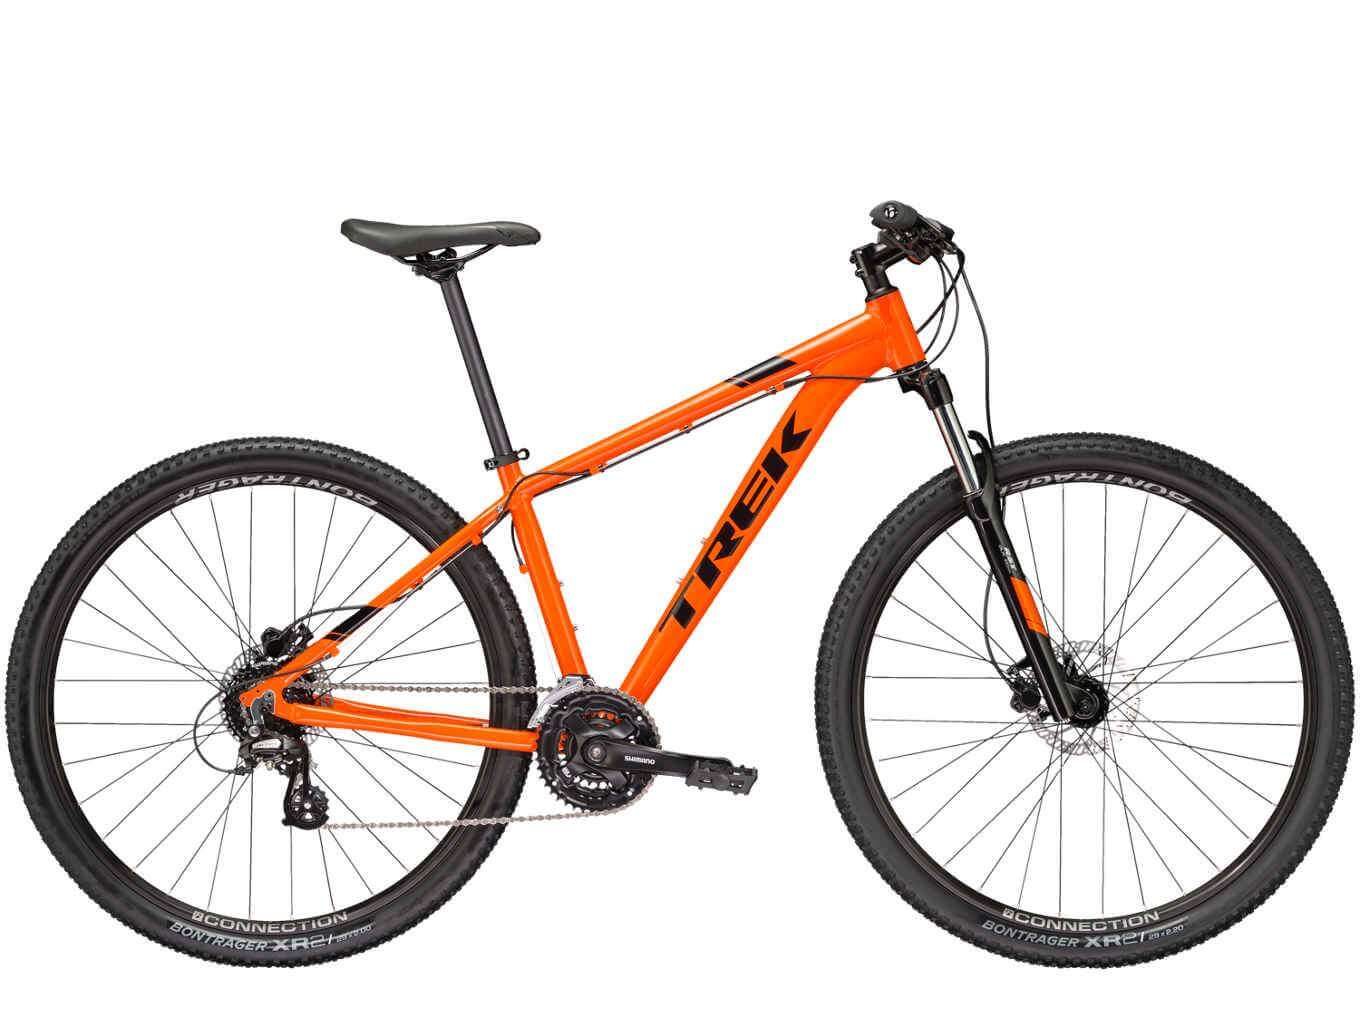 Best Mtb Cycles Under Inr 50000 In India For The Money Updated